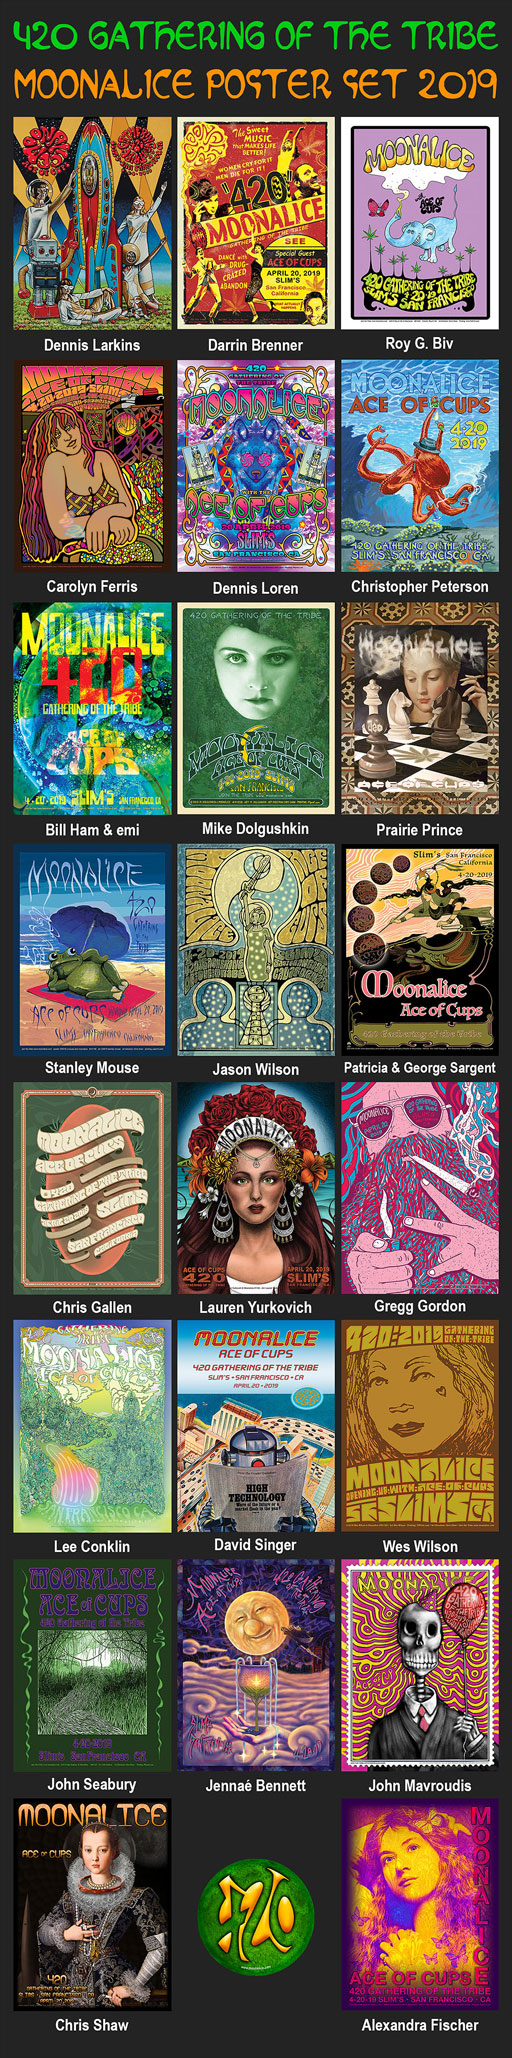 Moonalice's 420 Gathering of the Tribe 2019 Deluxe Poster Set